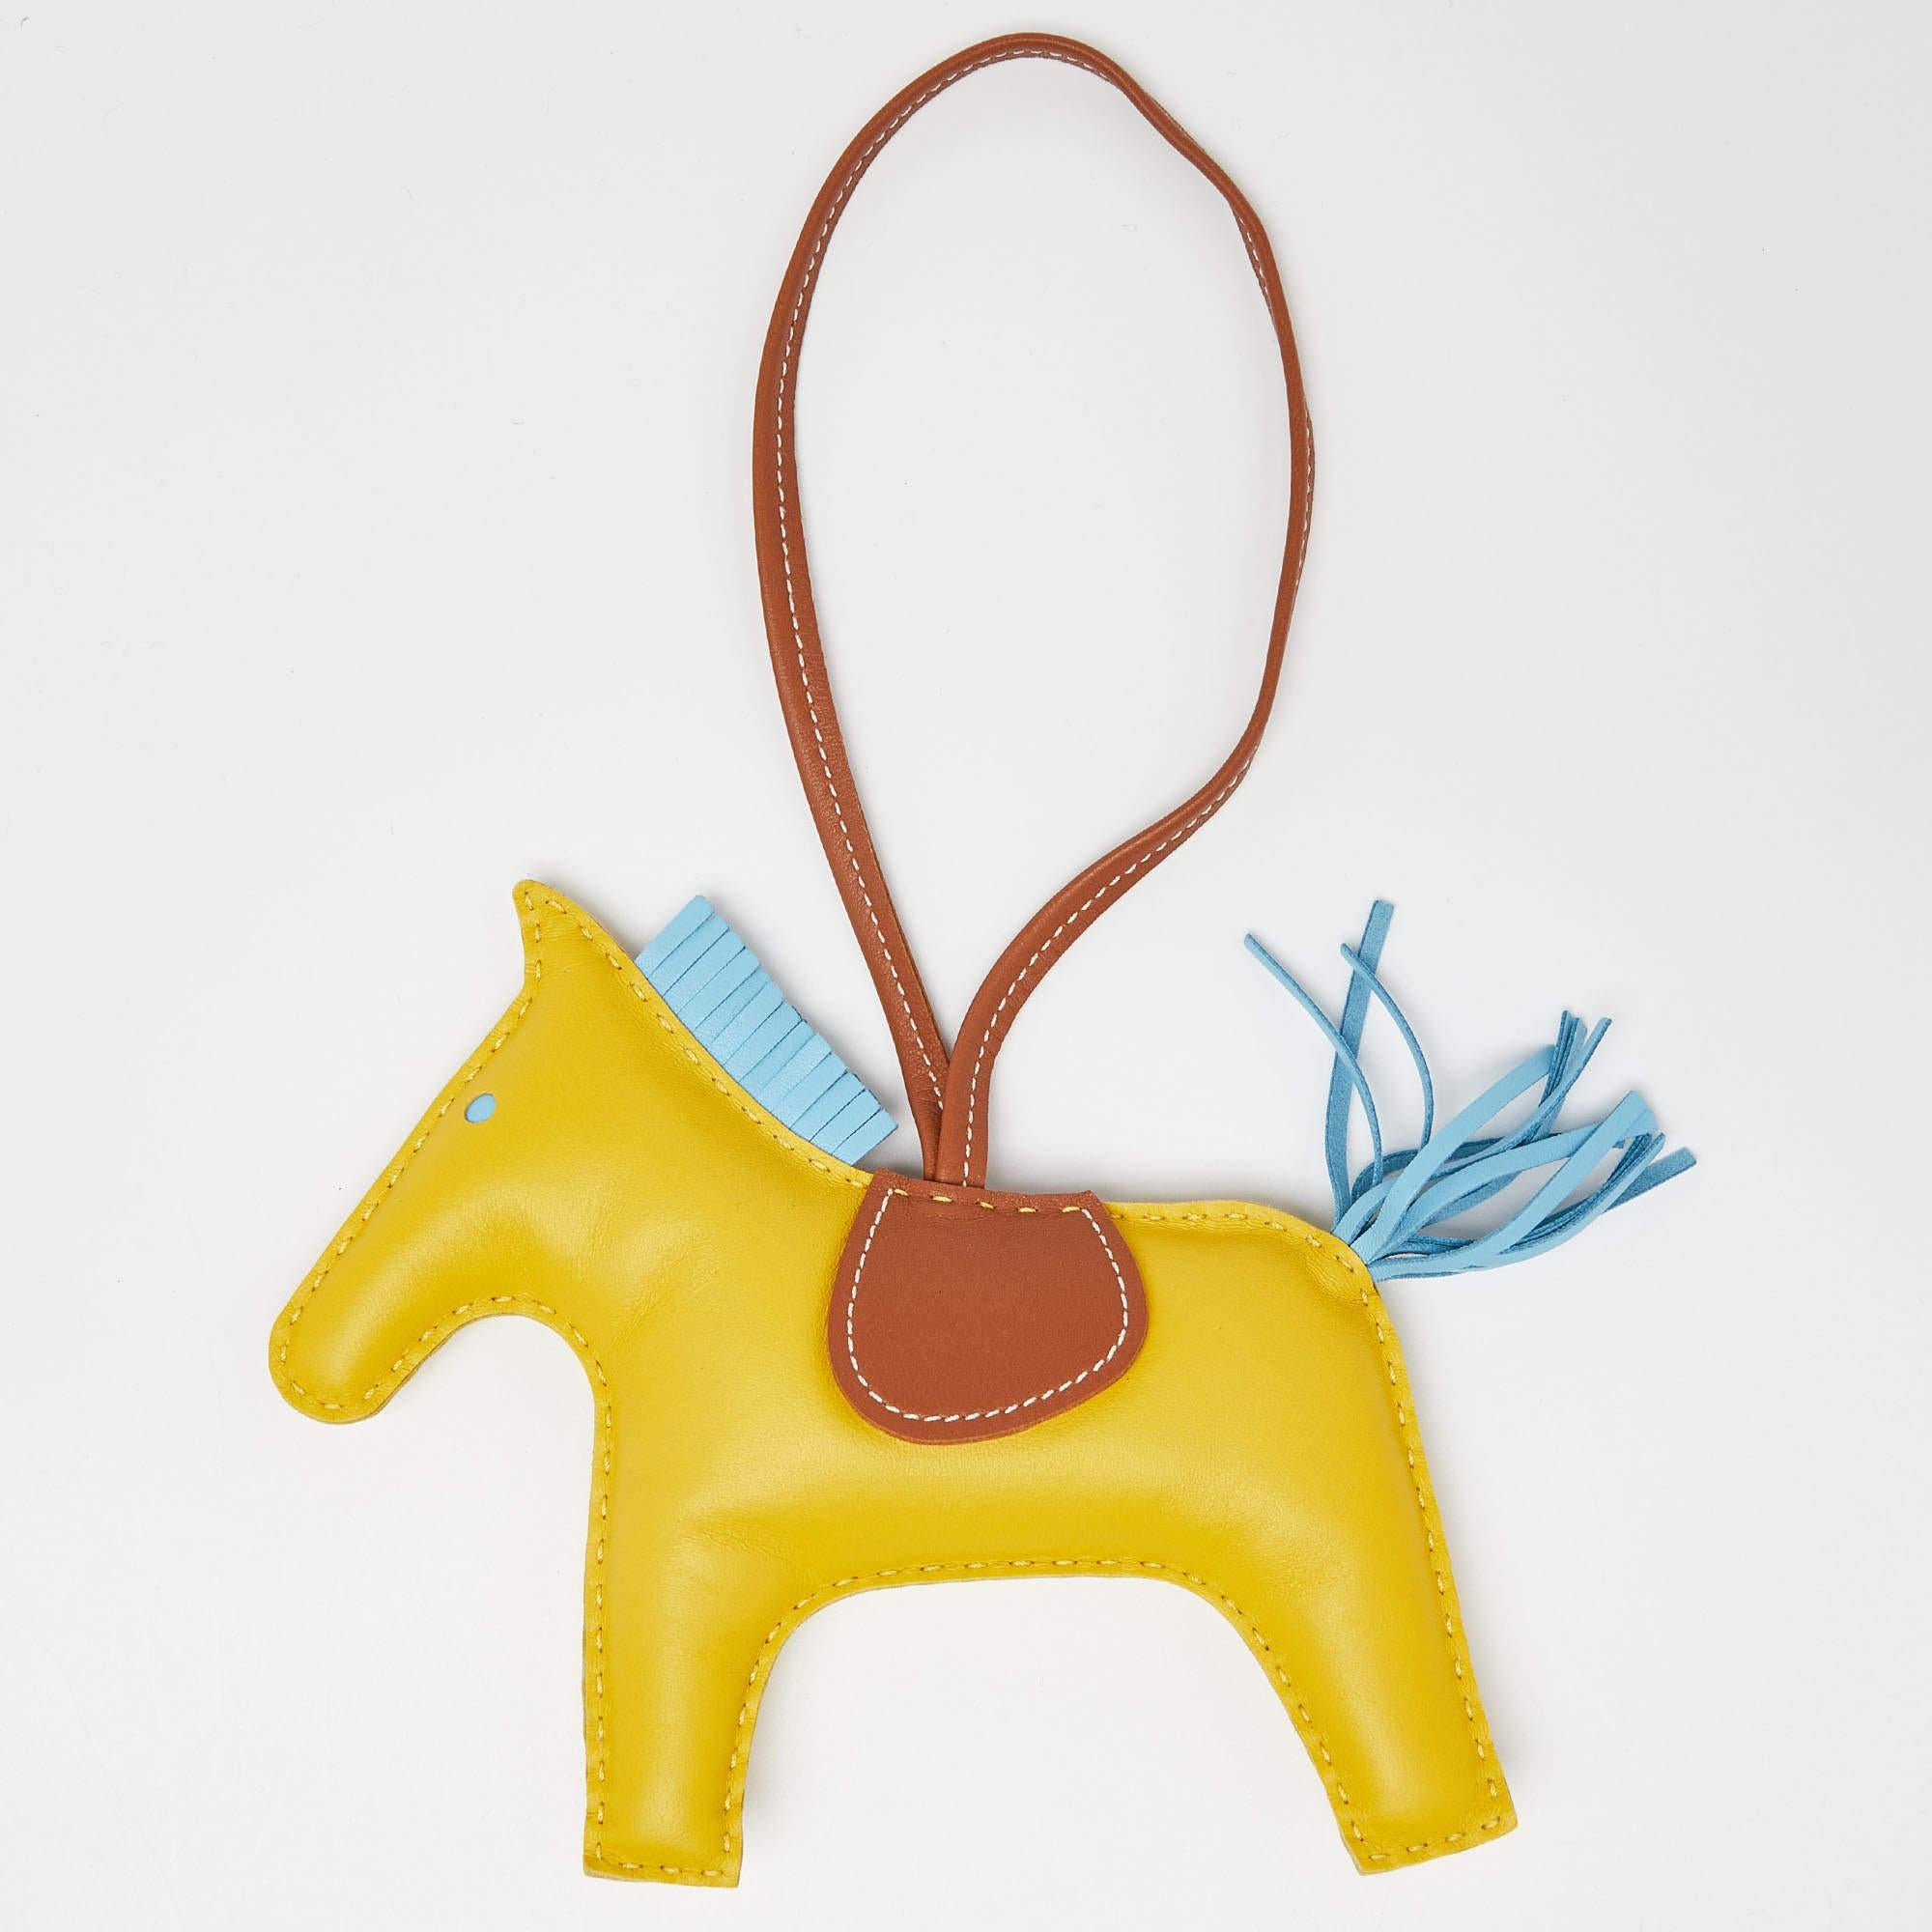 You know how much you love accessorizing, why not do the same for your bag? Glam up the bag with this Hermès bag charm shaped like a horse with a fringed mane and tail reflecting the label's equestrian roots. Made out of leather in three hues,